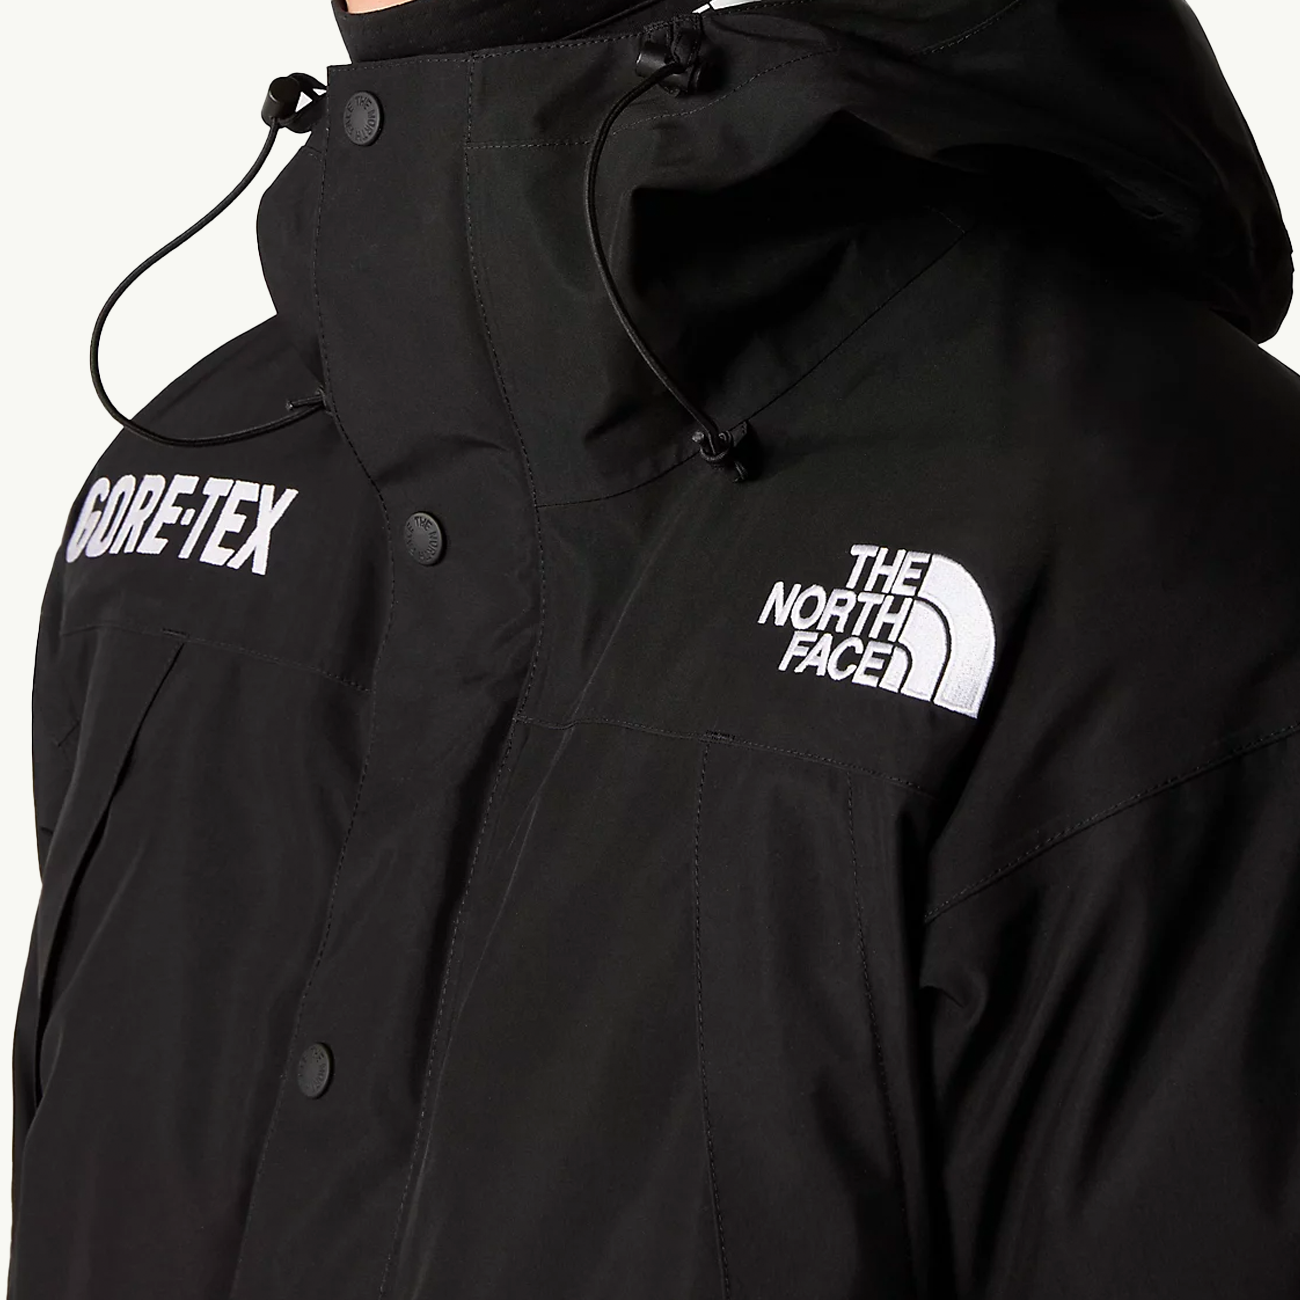 GORE-TEX Mountain Guide Insulated Jacket - TNF Black